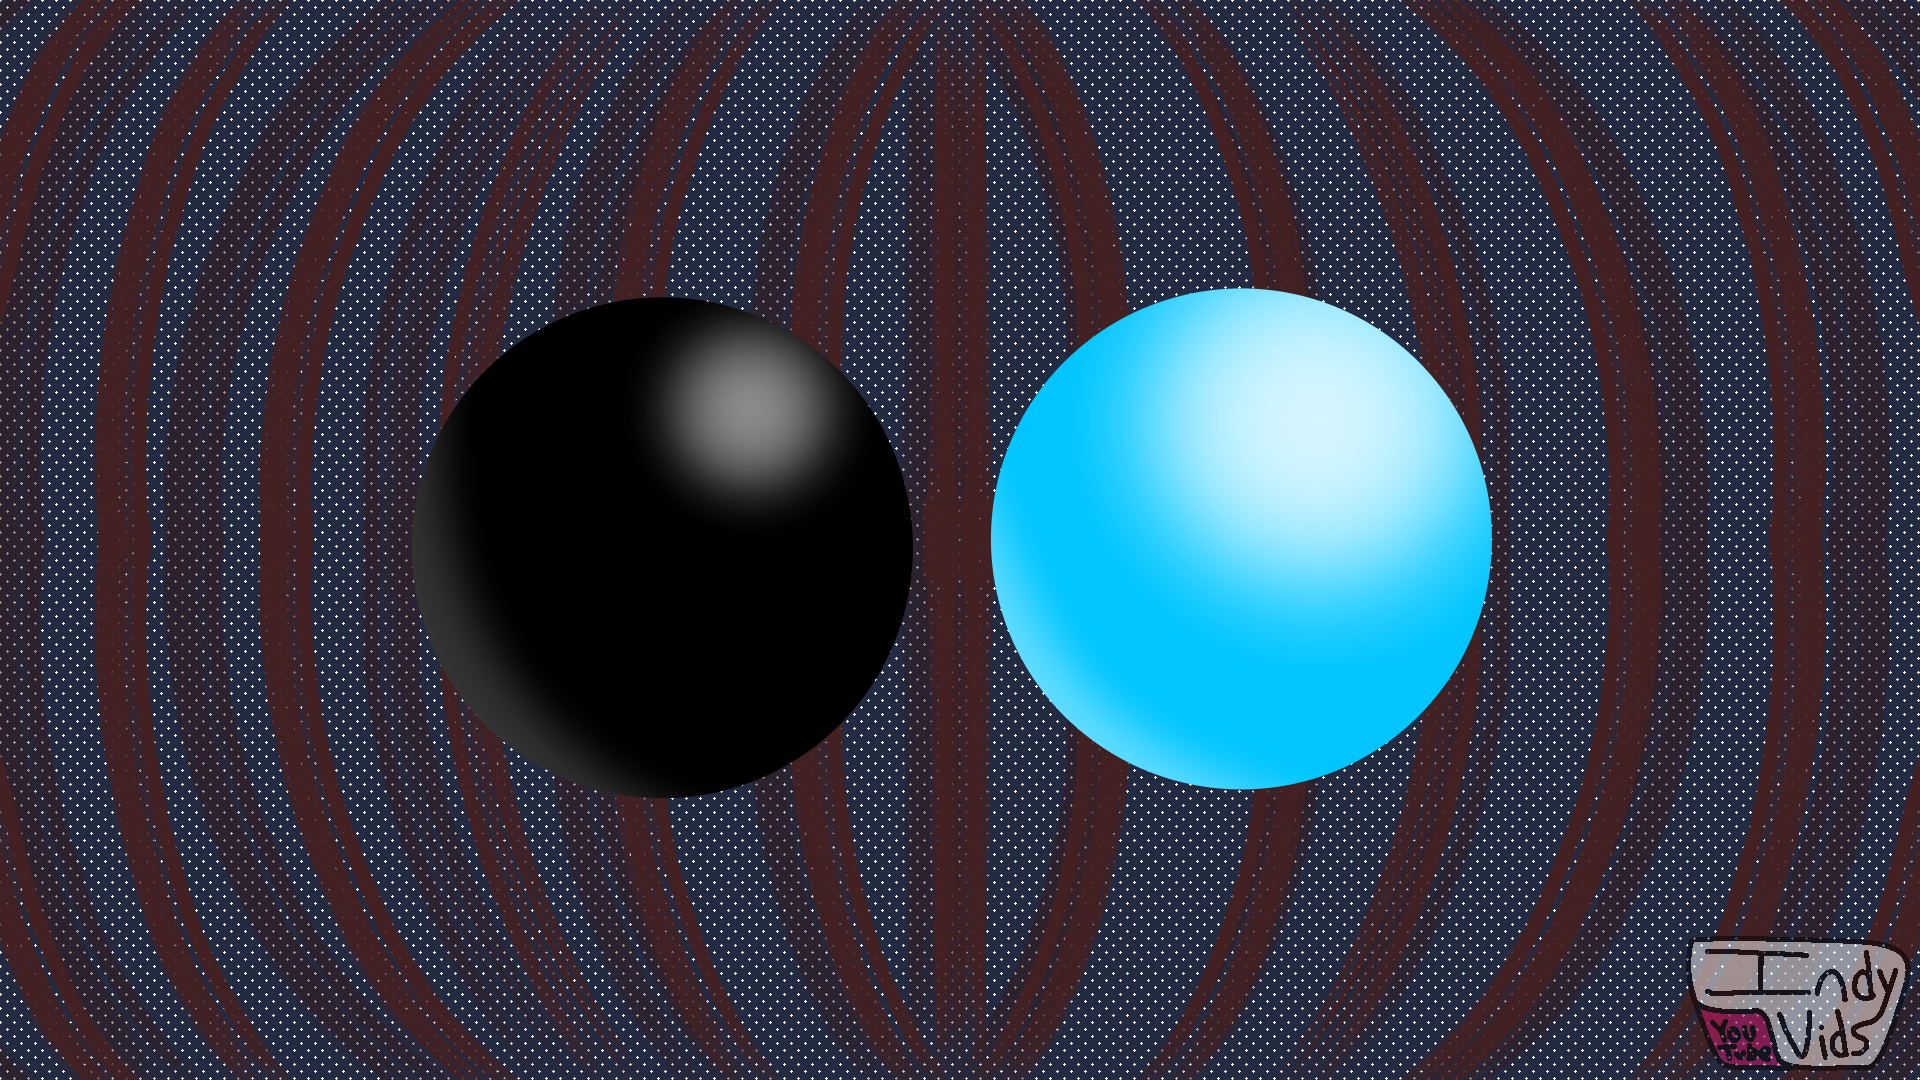 A black ball and a cyan ball placed closely together.